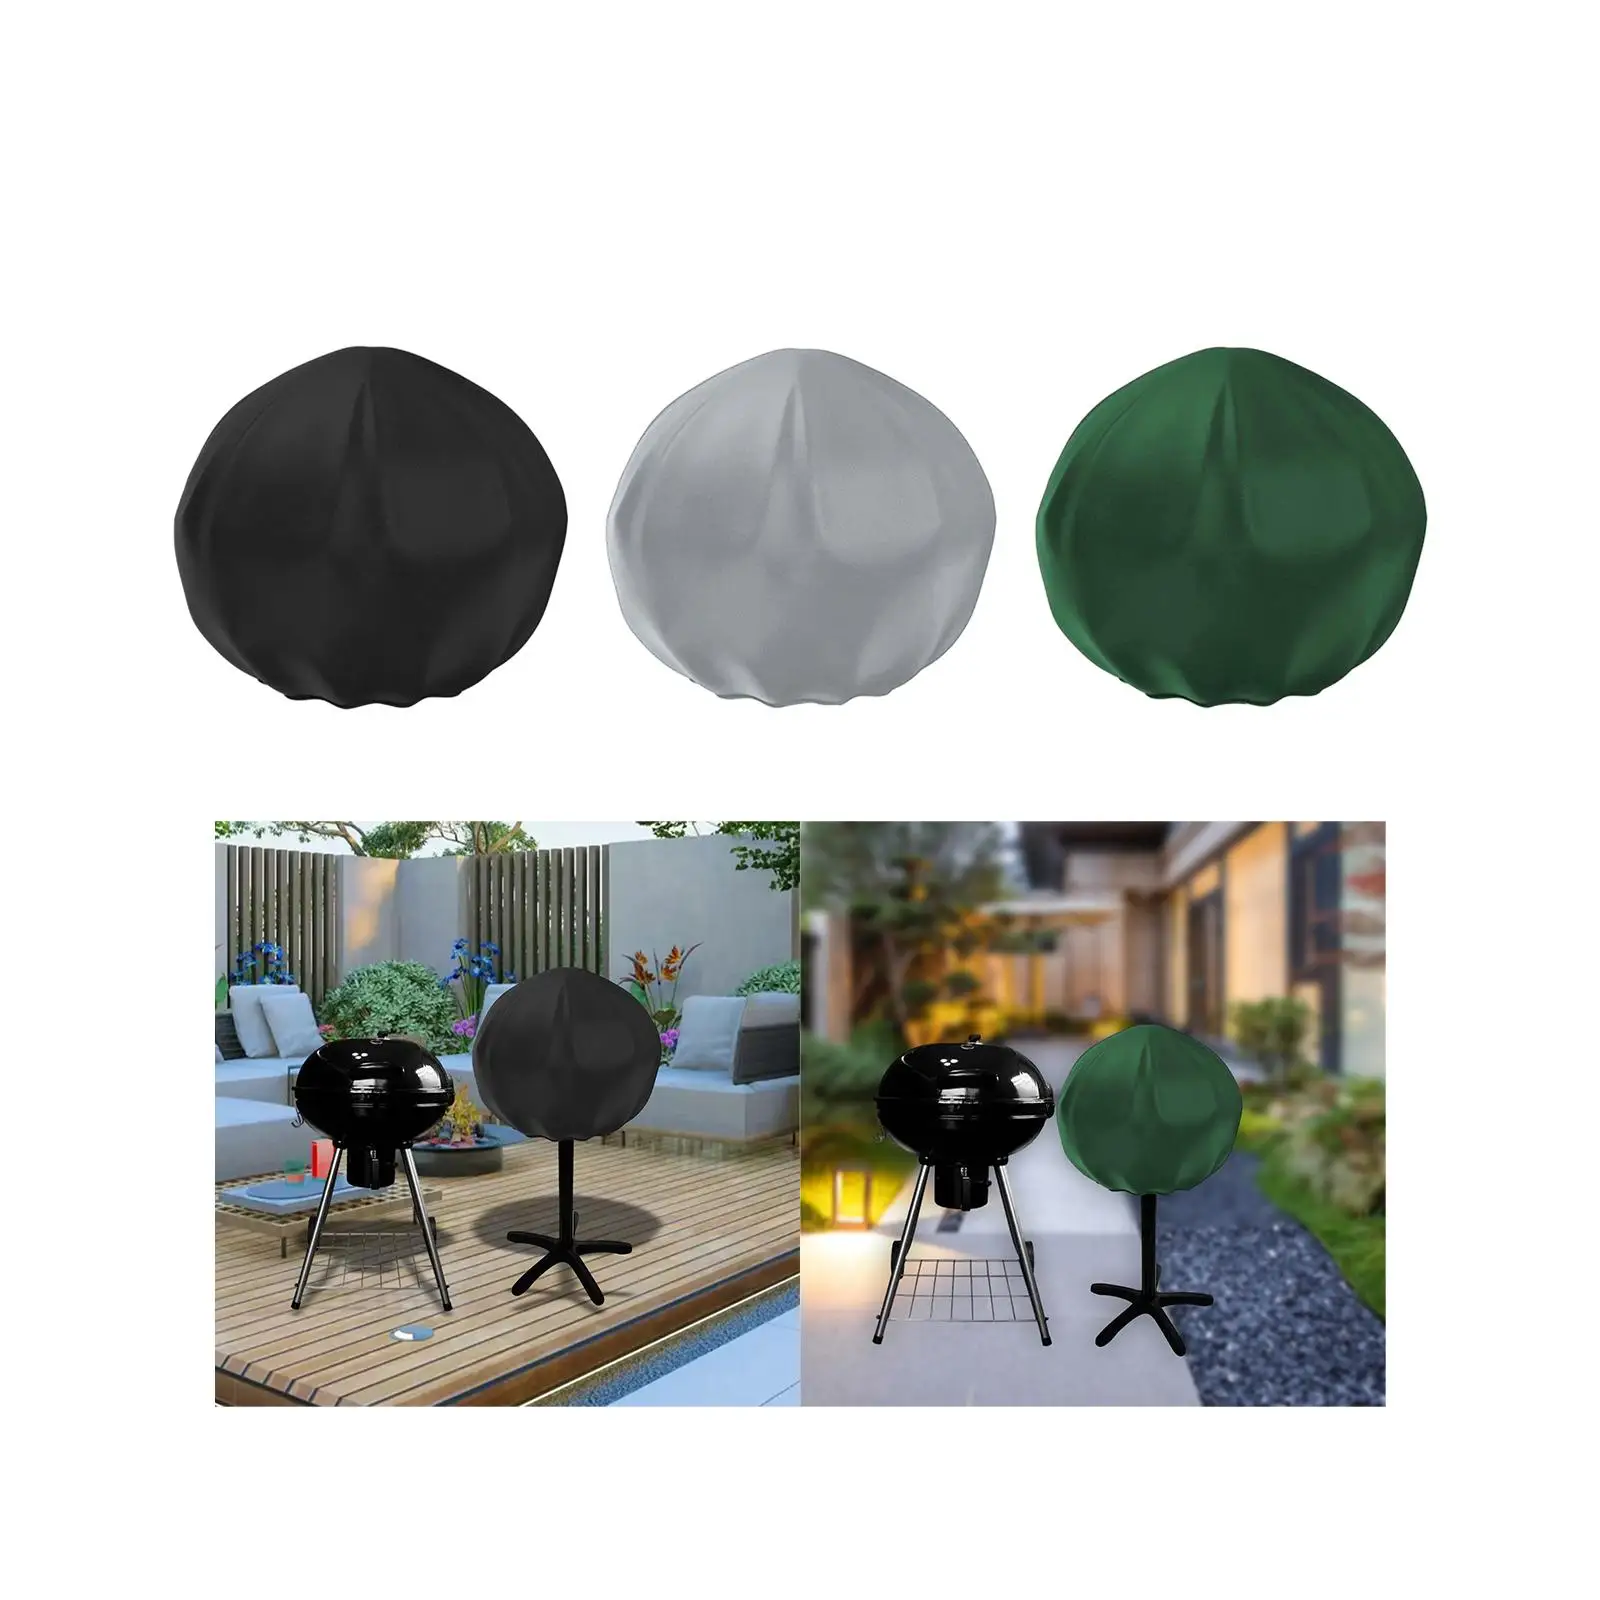 Vertical Round Grills Cover Drawstring Water Resistant for Outdoor Garden